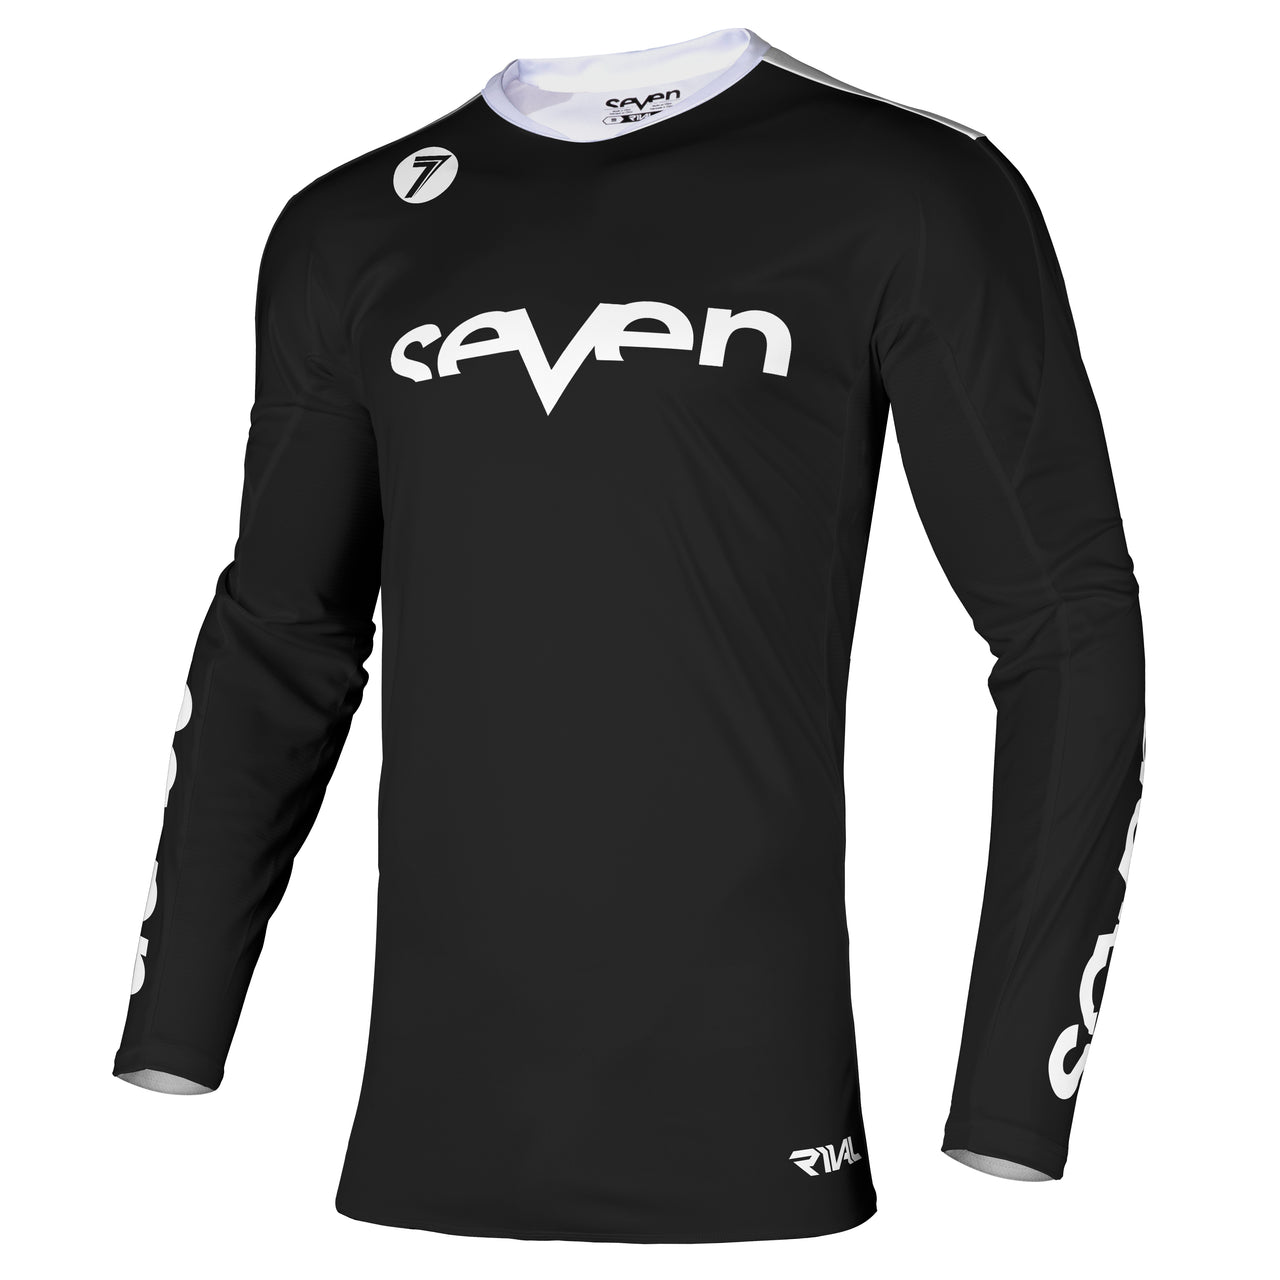 Seven MX 23.1 YOUTH Rival Staple Jersey Black